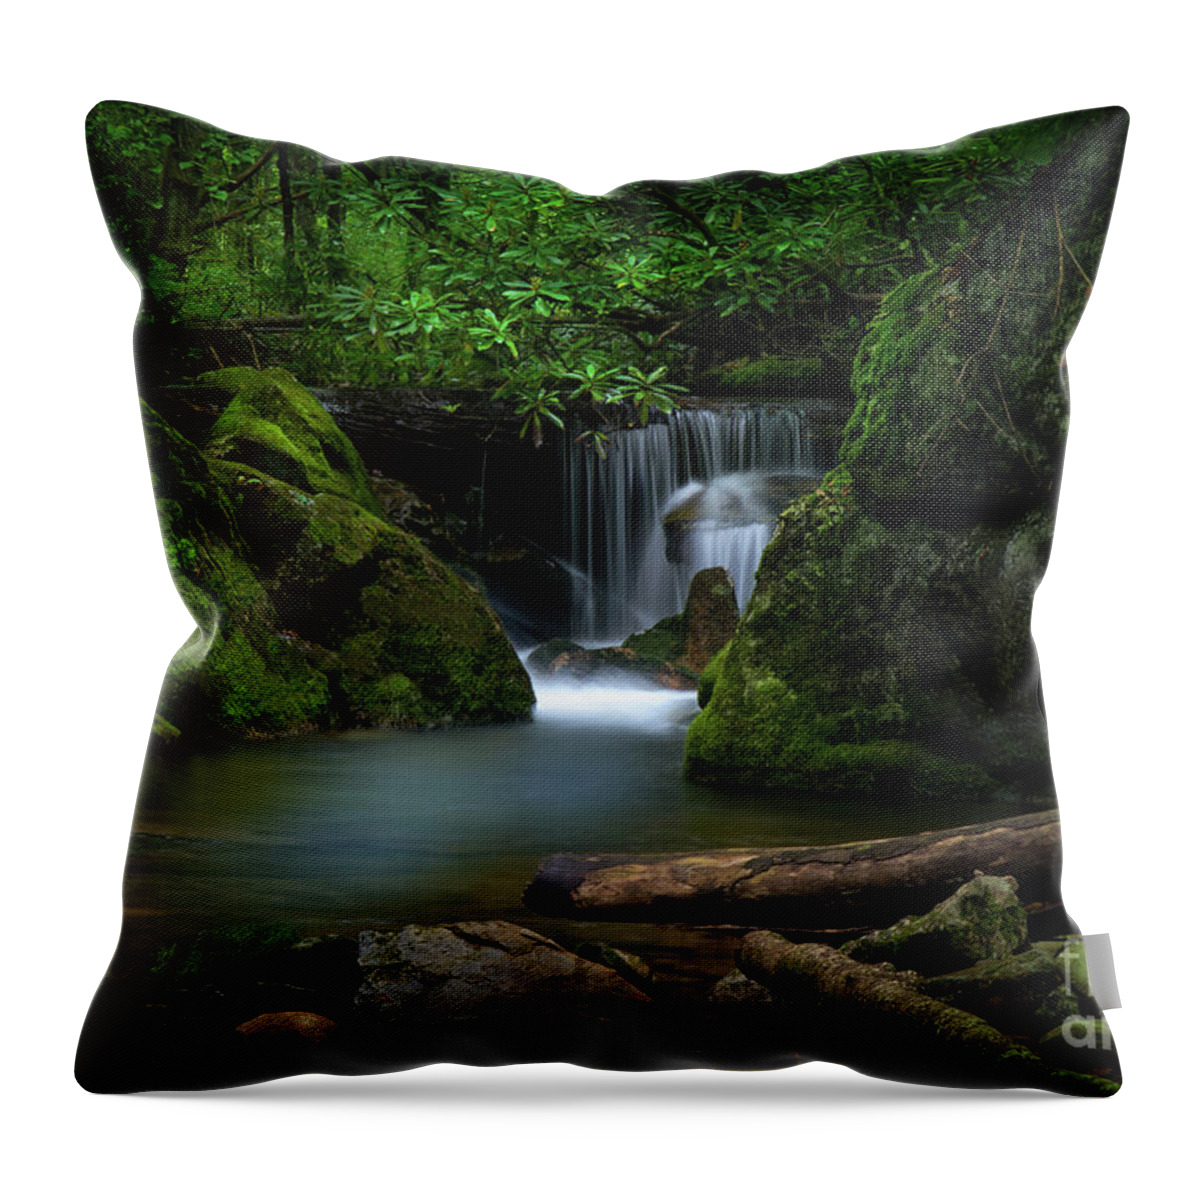 Secluded Throw Pillow featuring the photograph Secluded Waterfall by Shelia Hunt